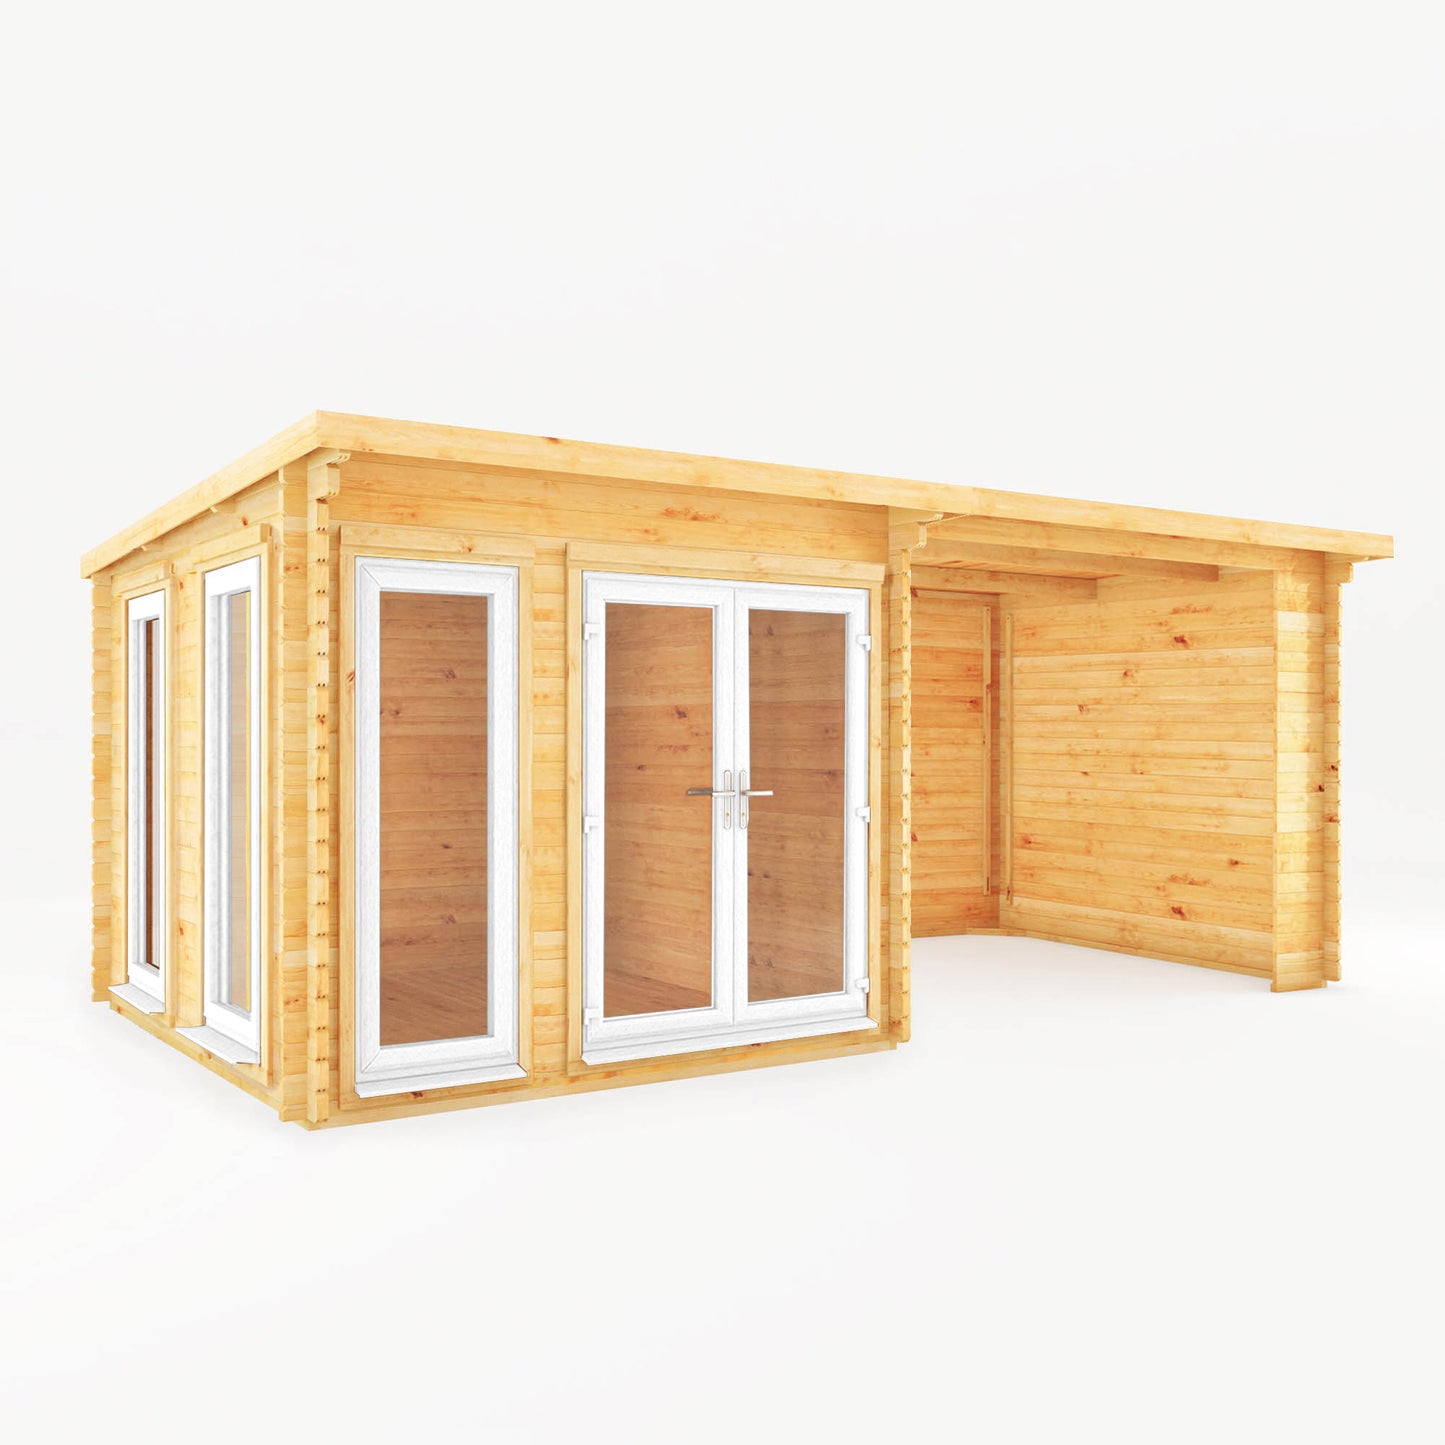 The 6 x 3m Wren Log Cabin with Patio Area and White UPVC